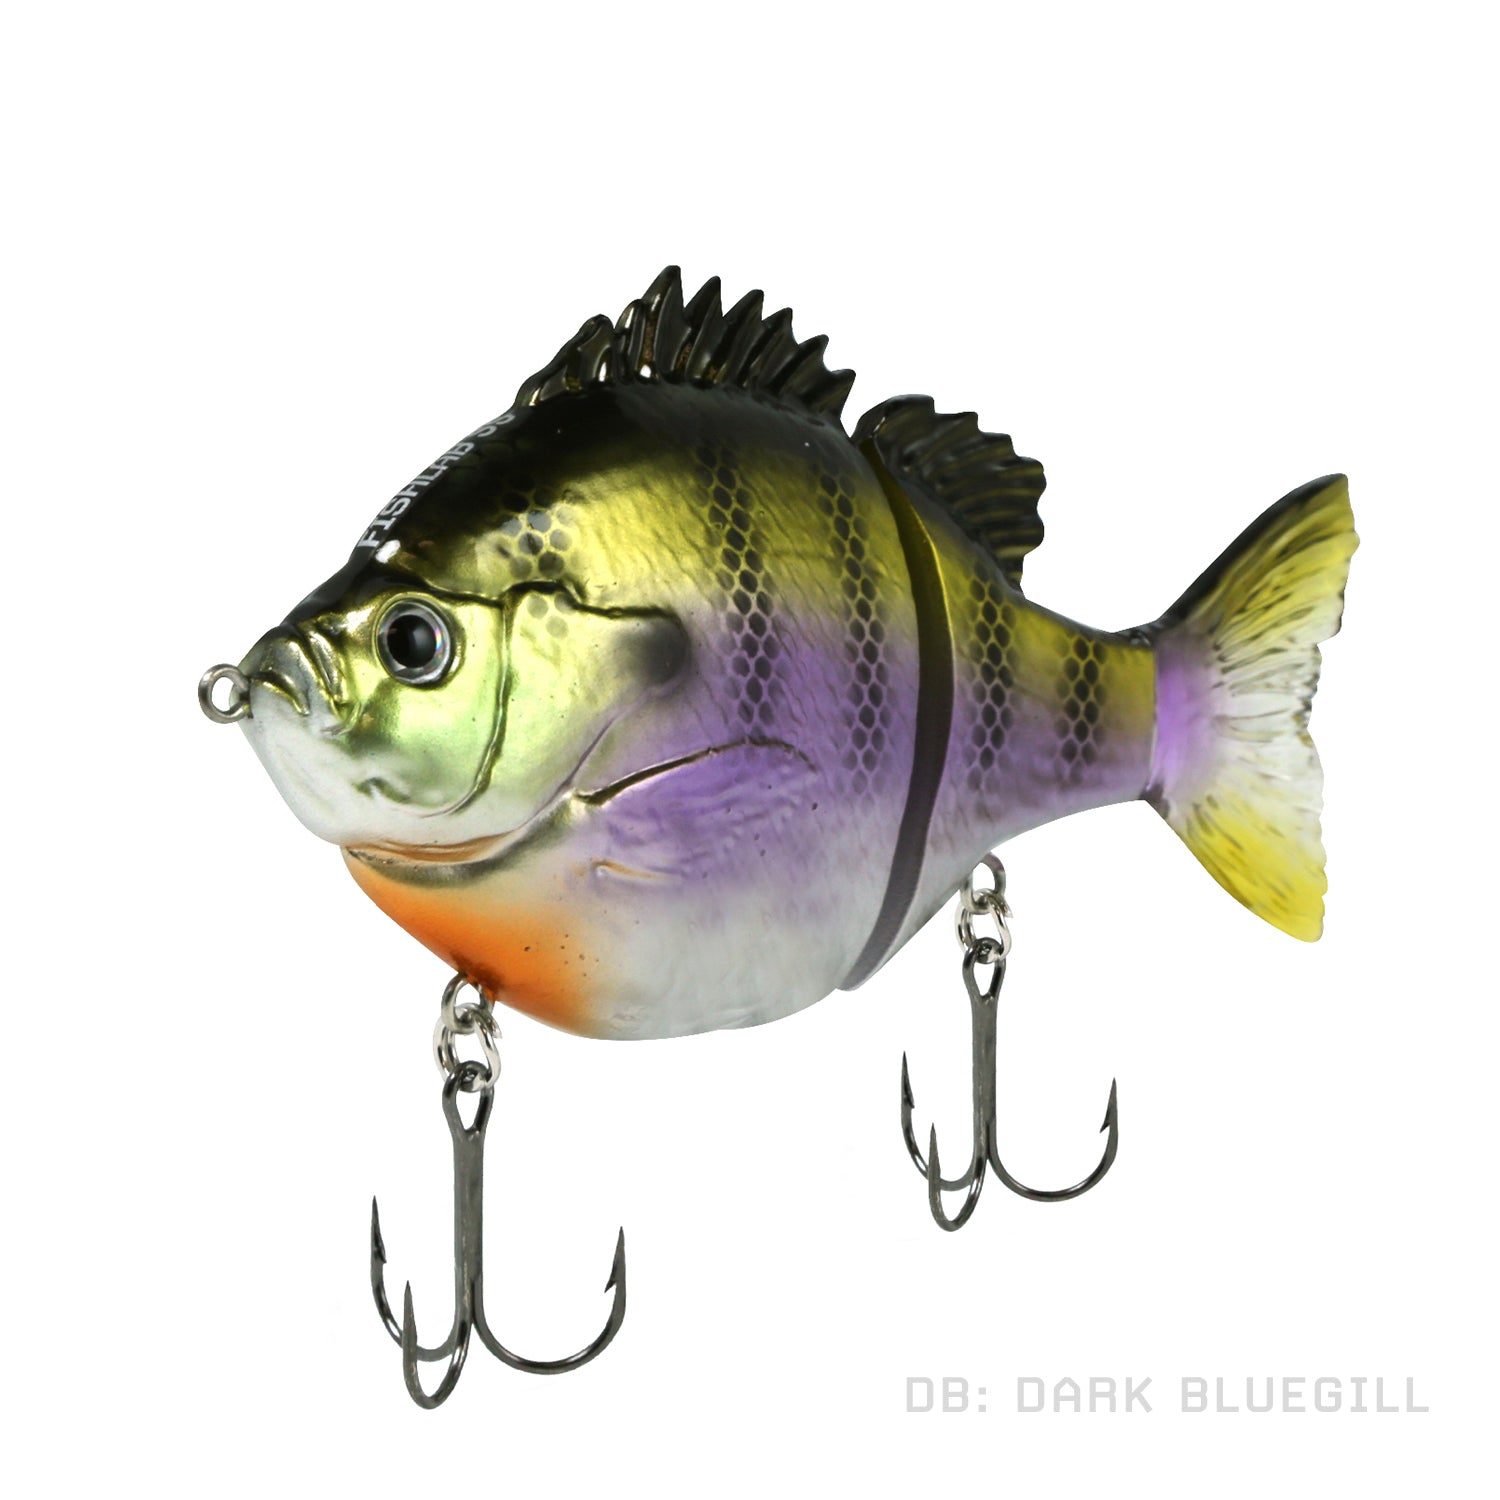  ODS Glide Bait Bluegill Sunfish Lifelike Metail Joint Fishing  Lure for Bass Trout Perch Shad (Color A) : Sports & Outdoors